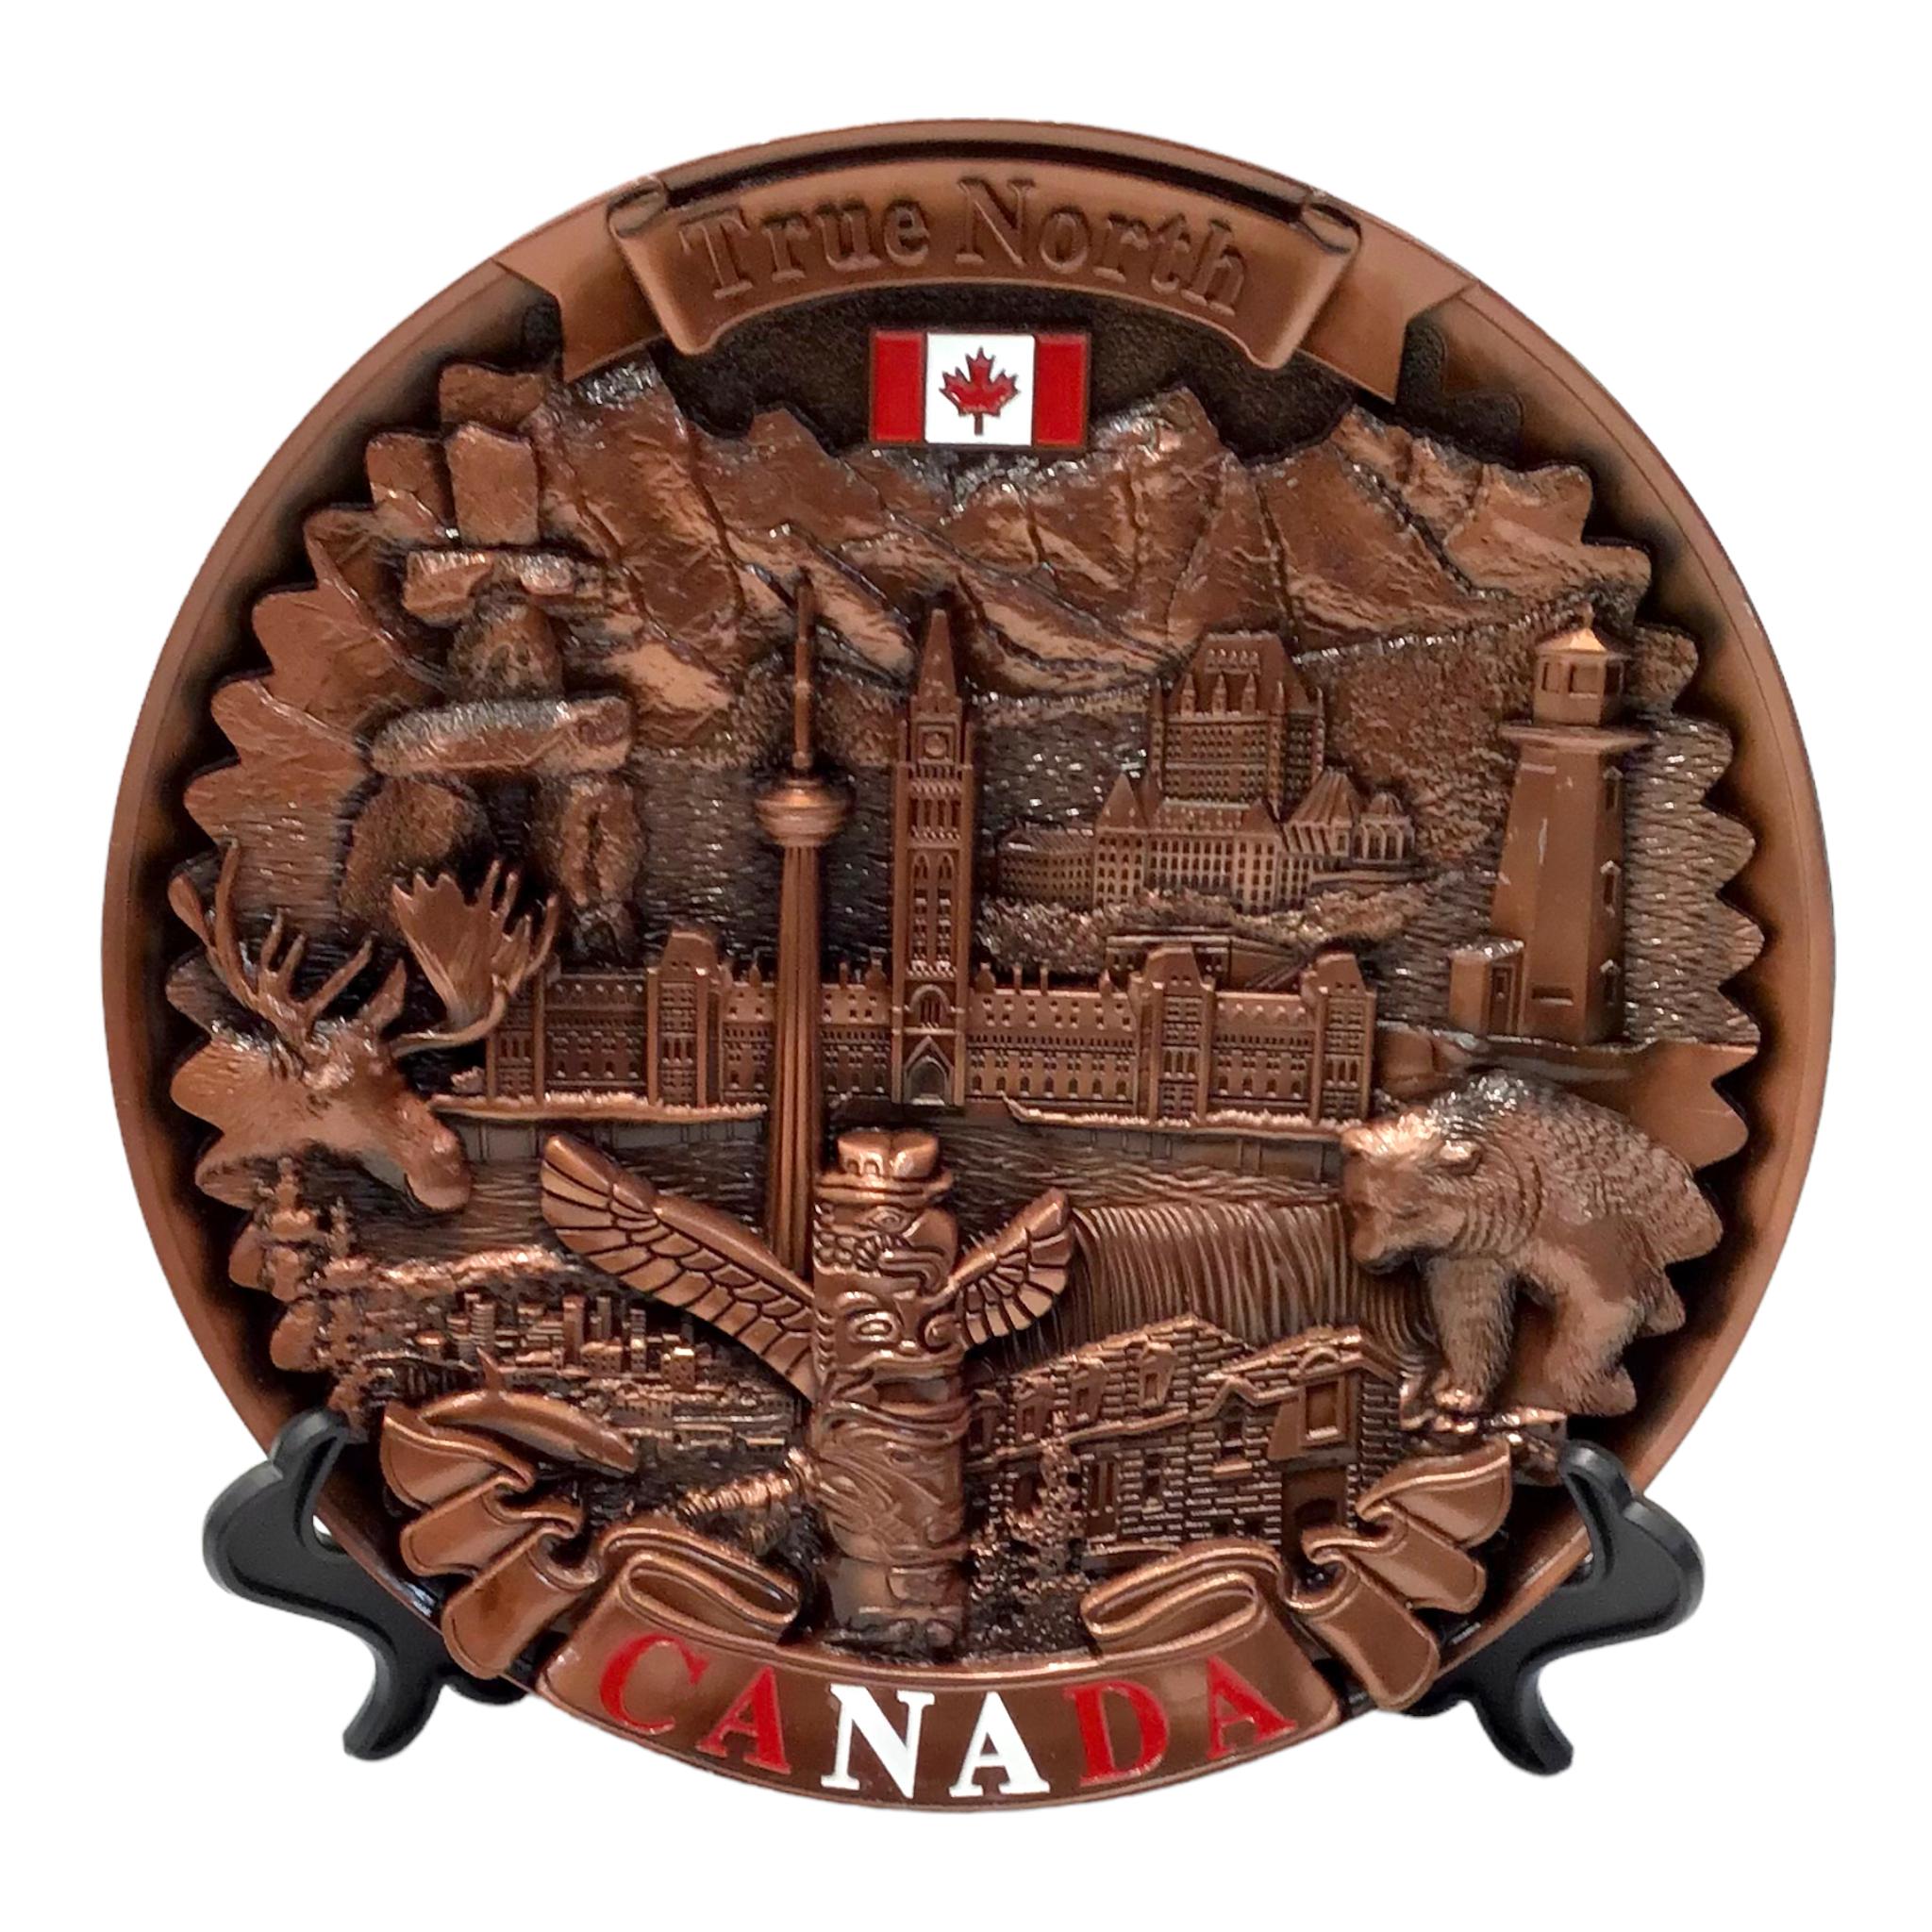 TRUE NORTH CANADA VINTAGE PEWTER SCENIC METAL PLATE 8”D HOME DECORATIONS SOUVENIR GIFT